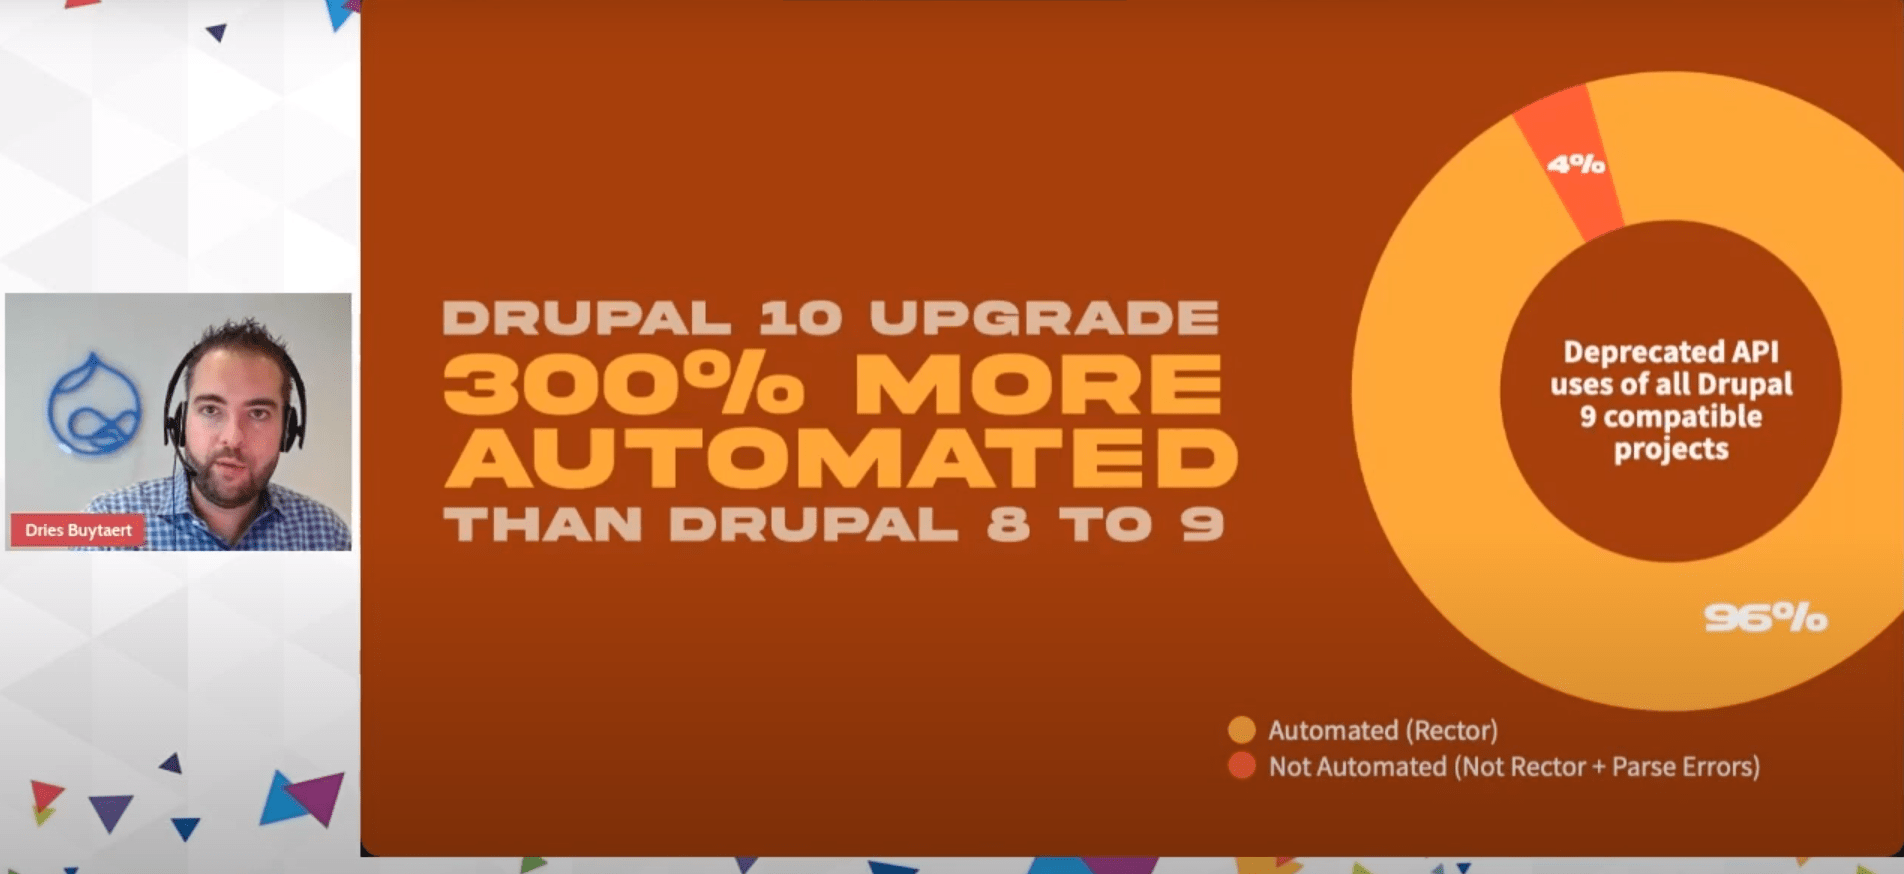 Easy upgrades to Drupal 10